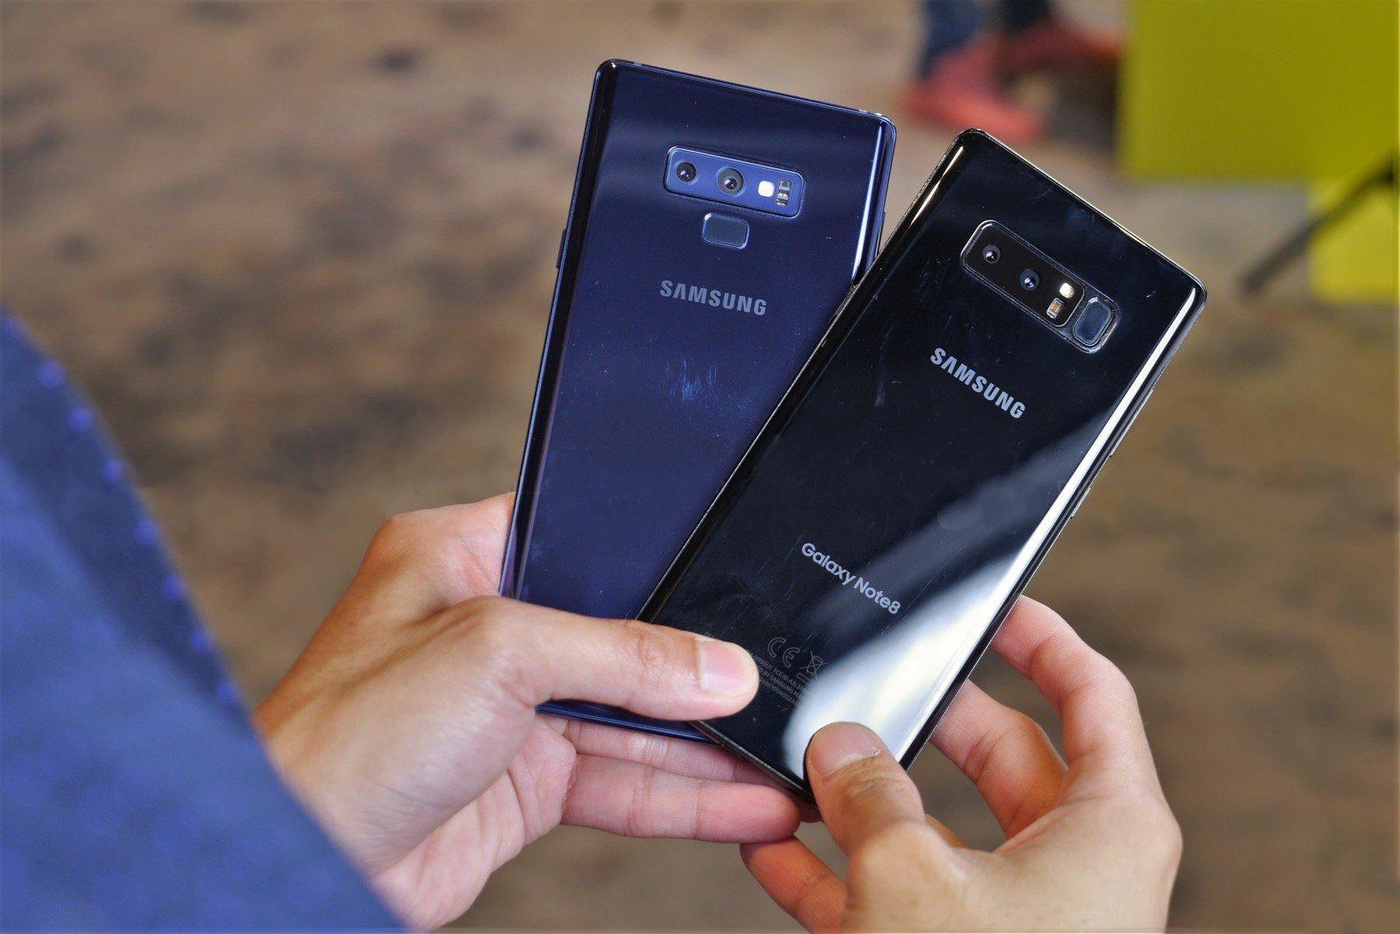 Samsung Galaxy S9 vs S8 comparison, what is the difference?